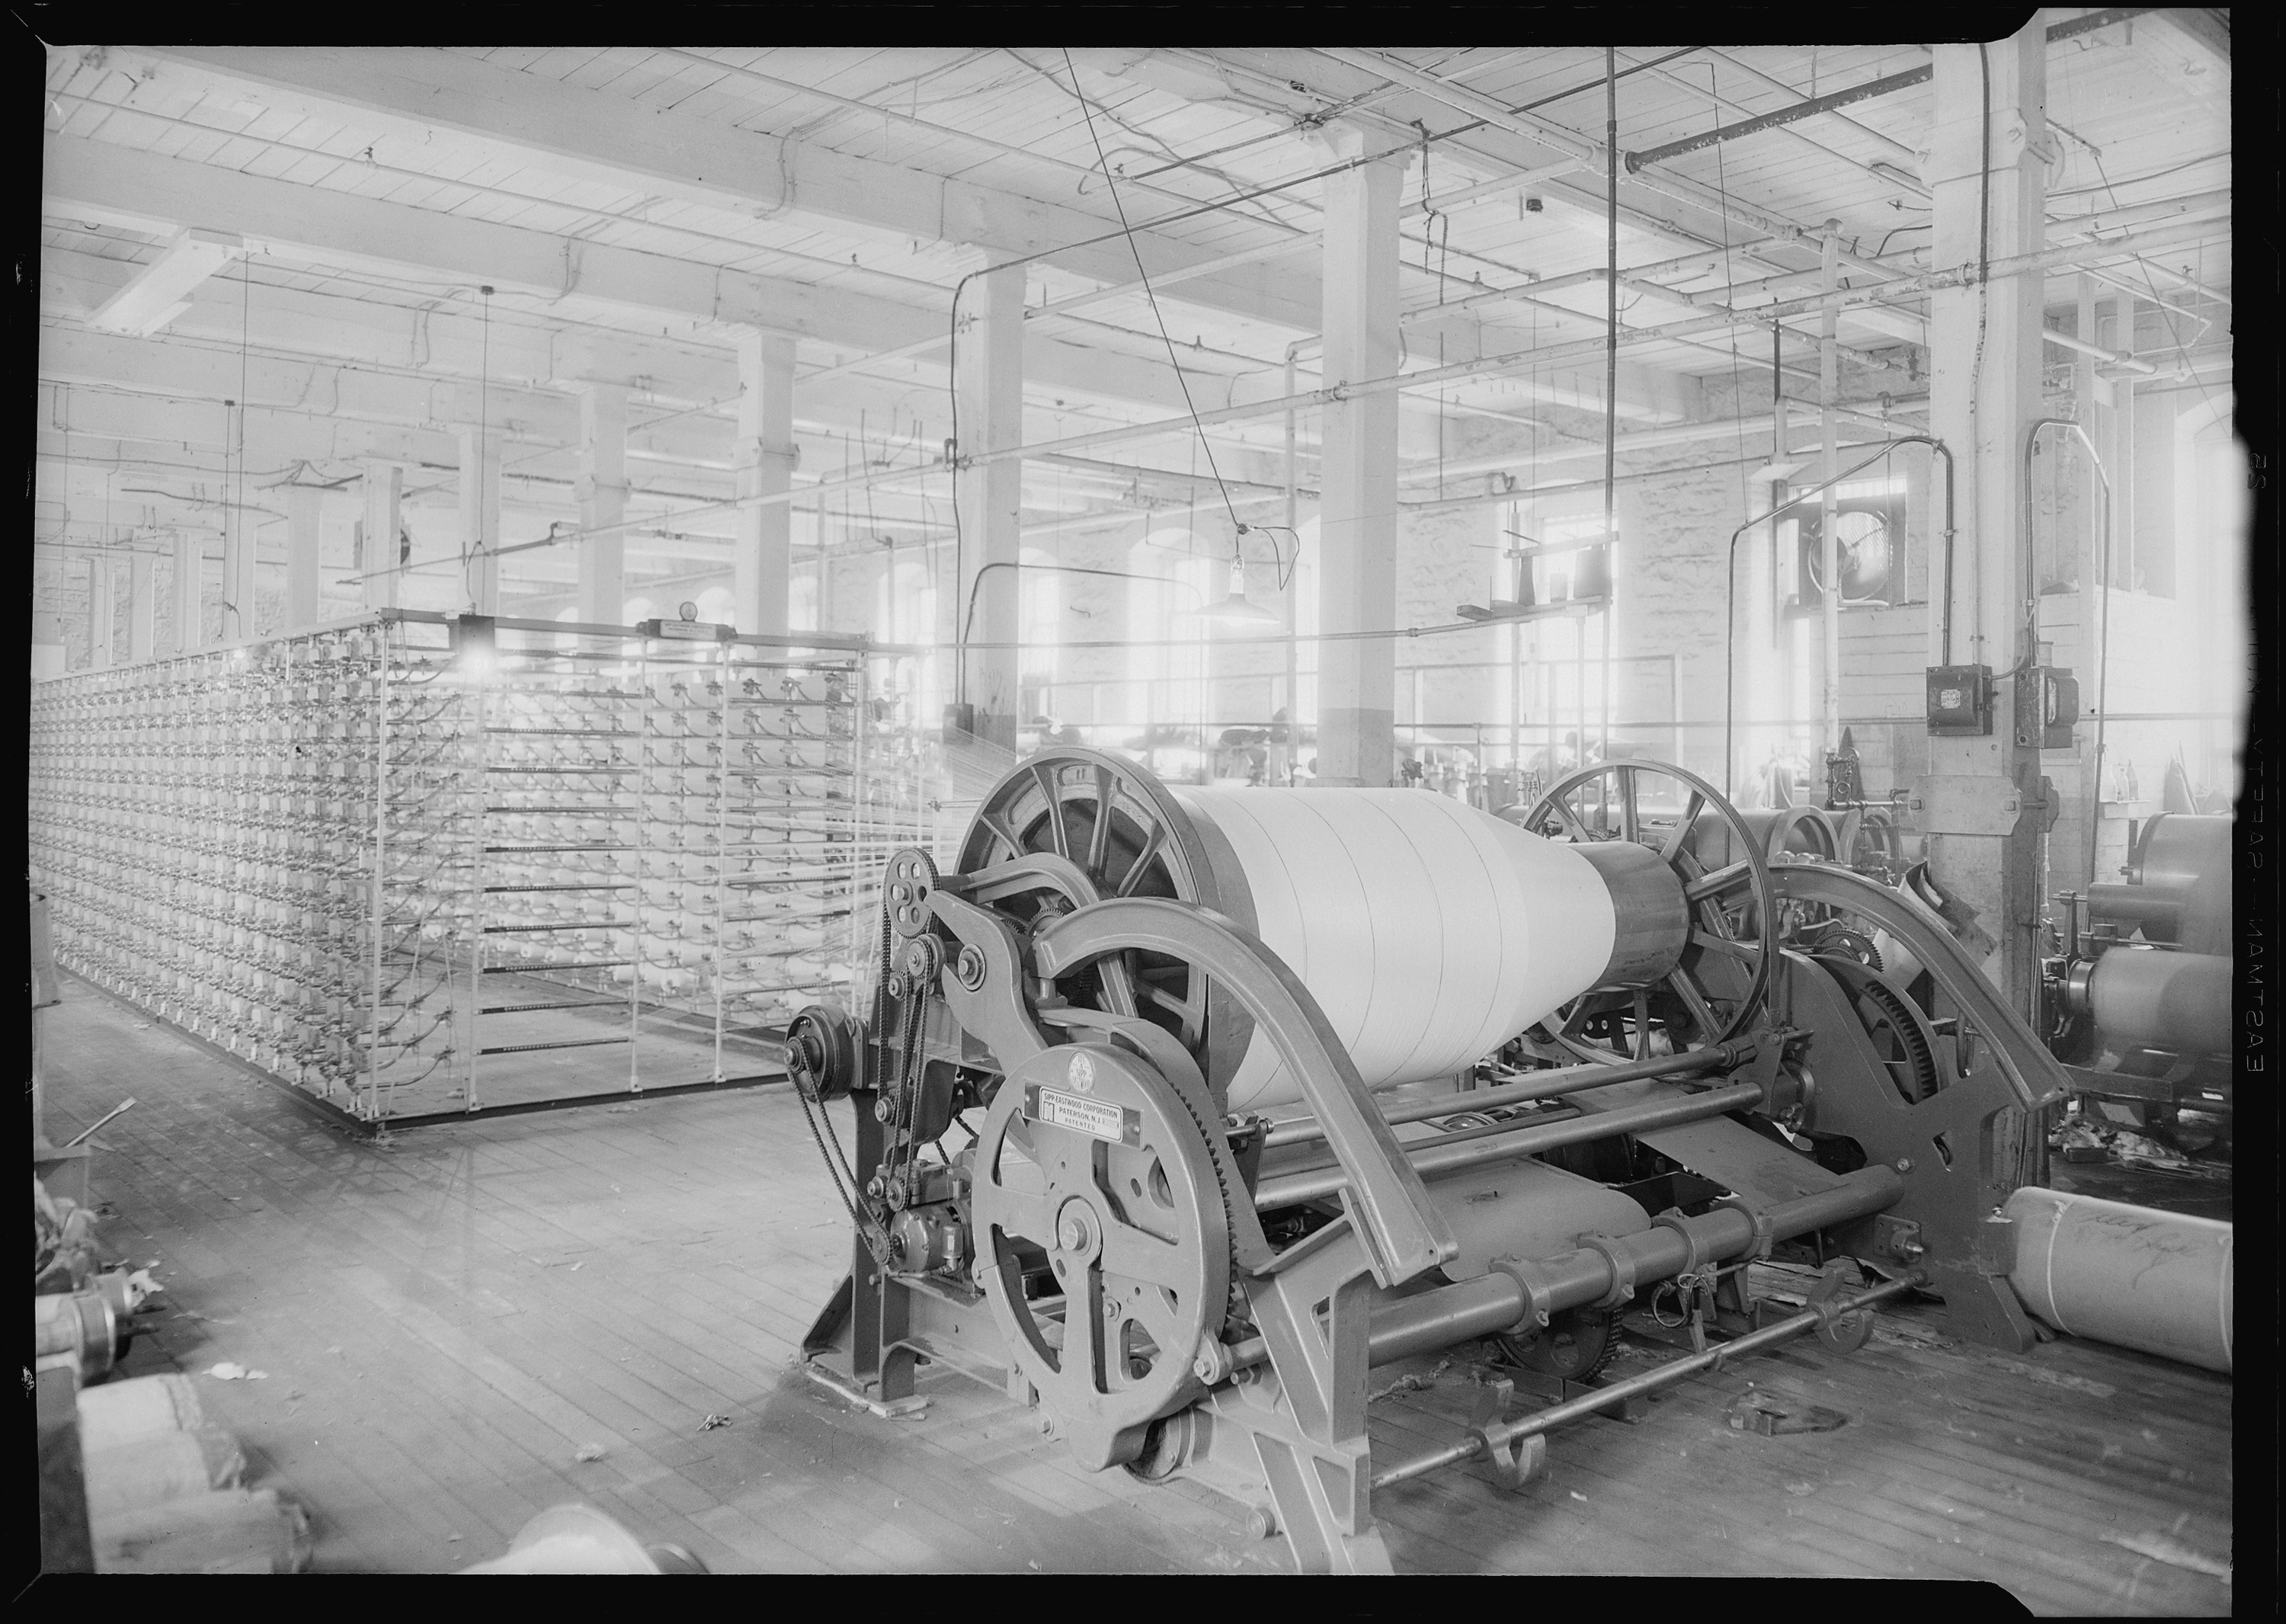 Paterson, New Jersey - Textiles. (Another view of large textile machine.) - NARA - 518767